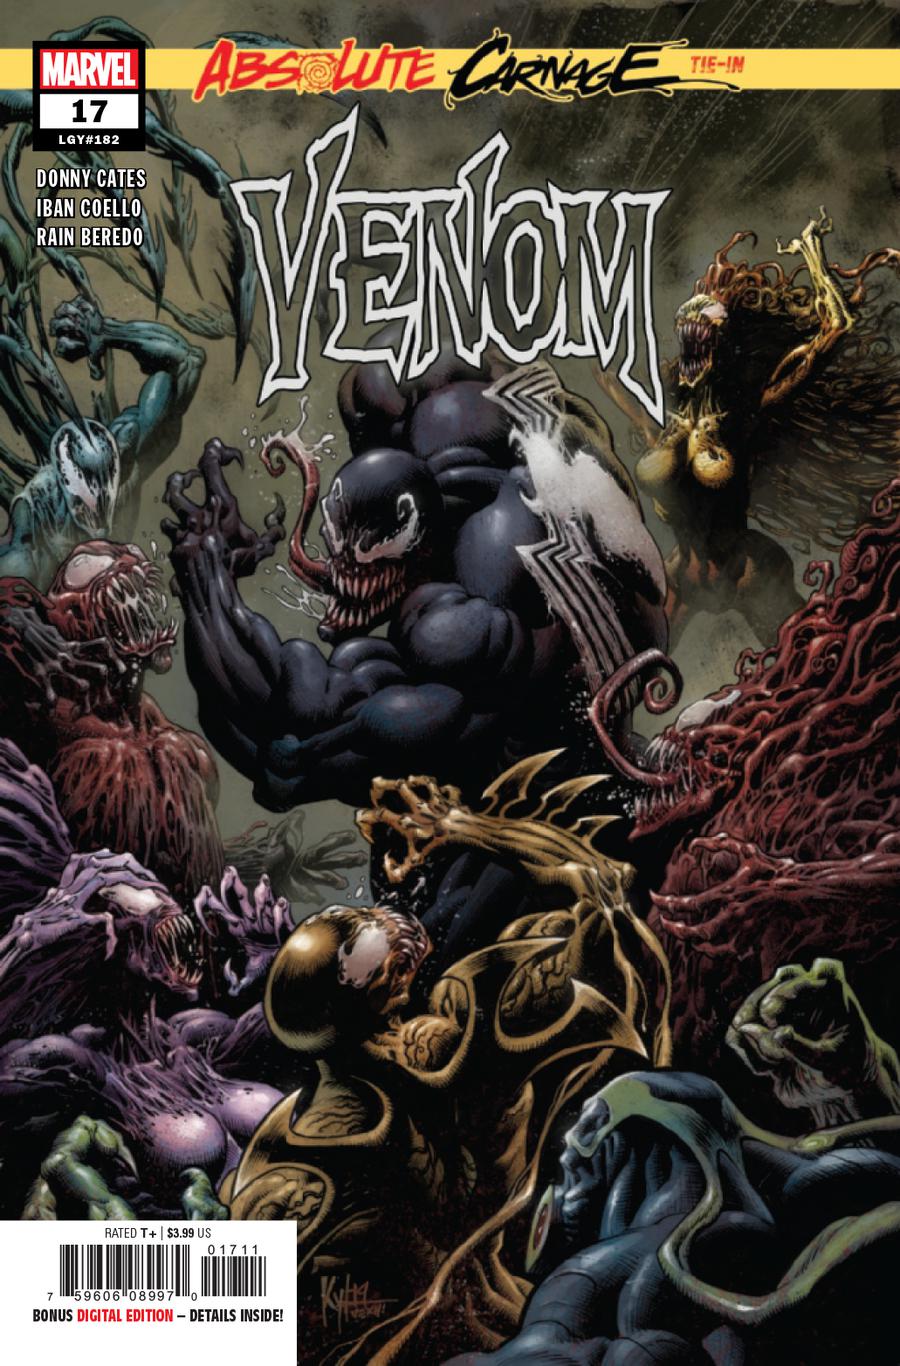 Venom Vol 4 #17 Cover A 1st Ptg Regular Kyle Hotz Cover (Absolute Carnage Tie-In)